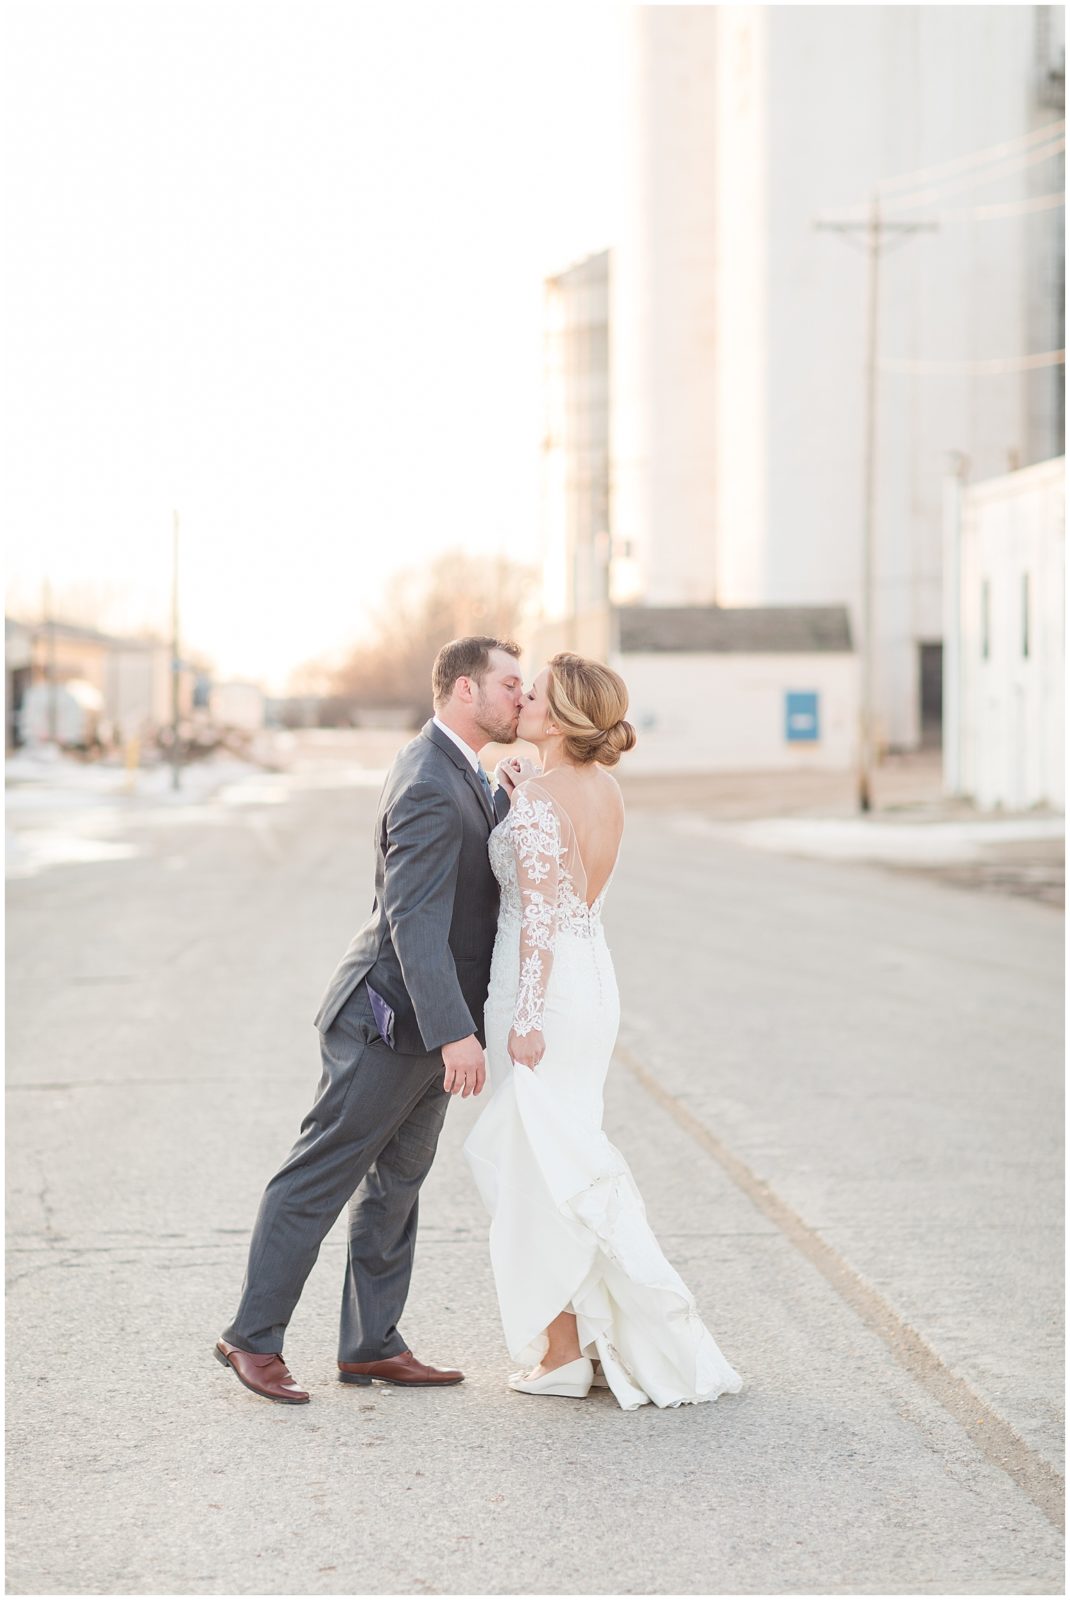 Wedding sunset portraits, shot by Jessica Brees, photographer and videographer near Sioux City, Iowa